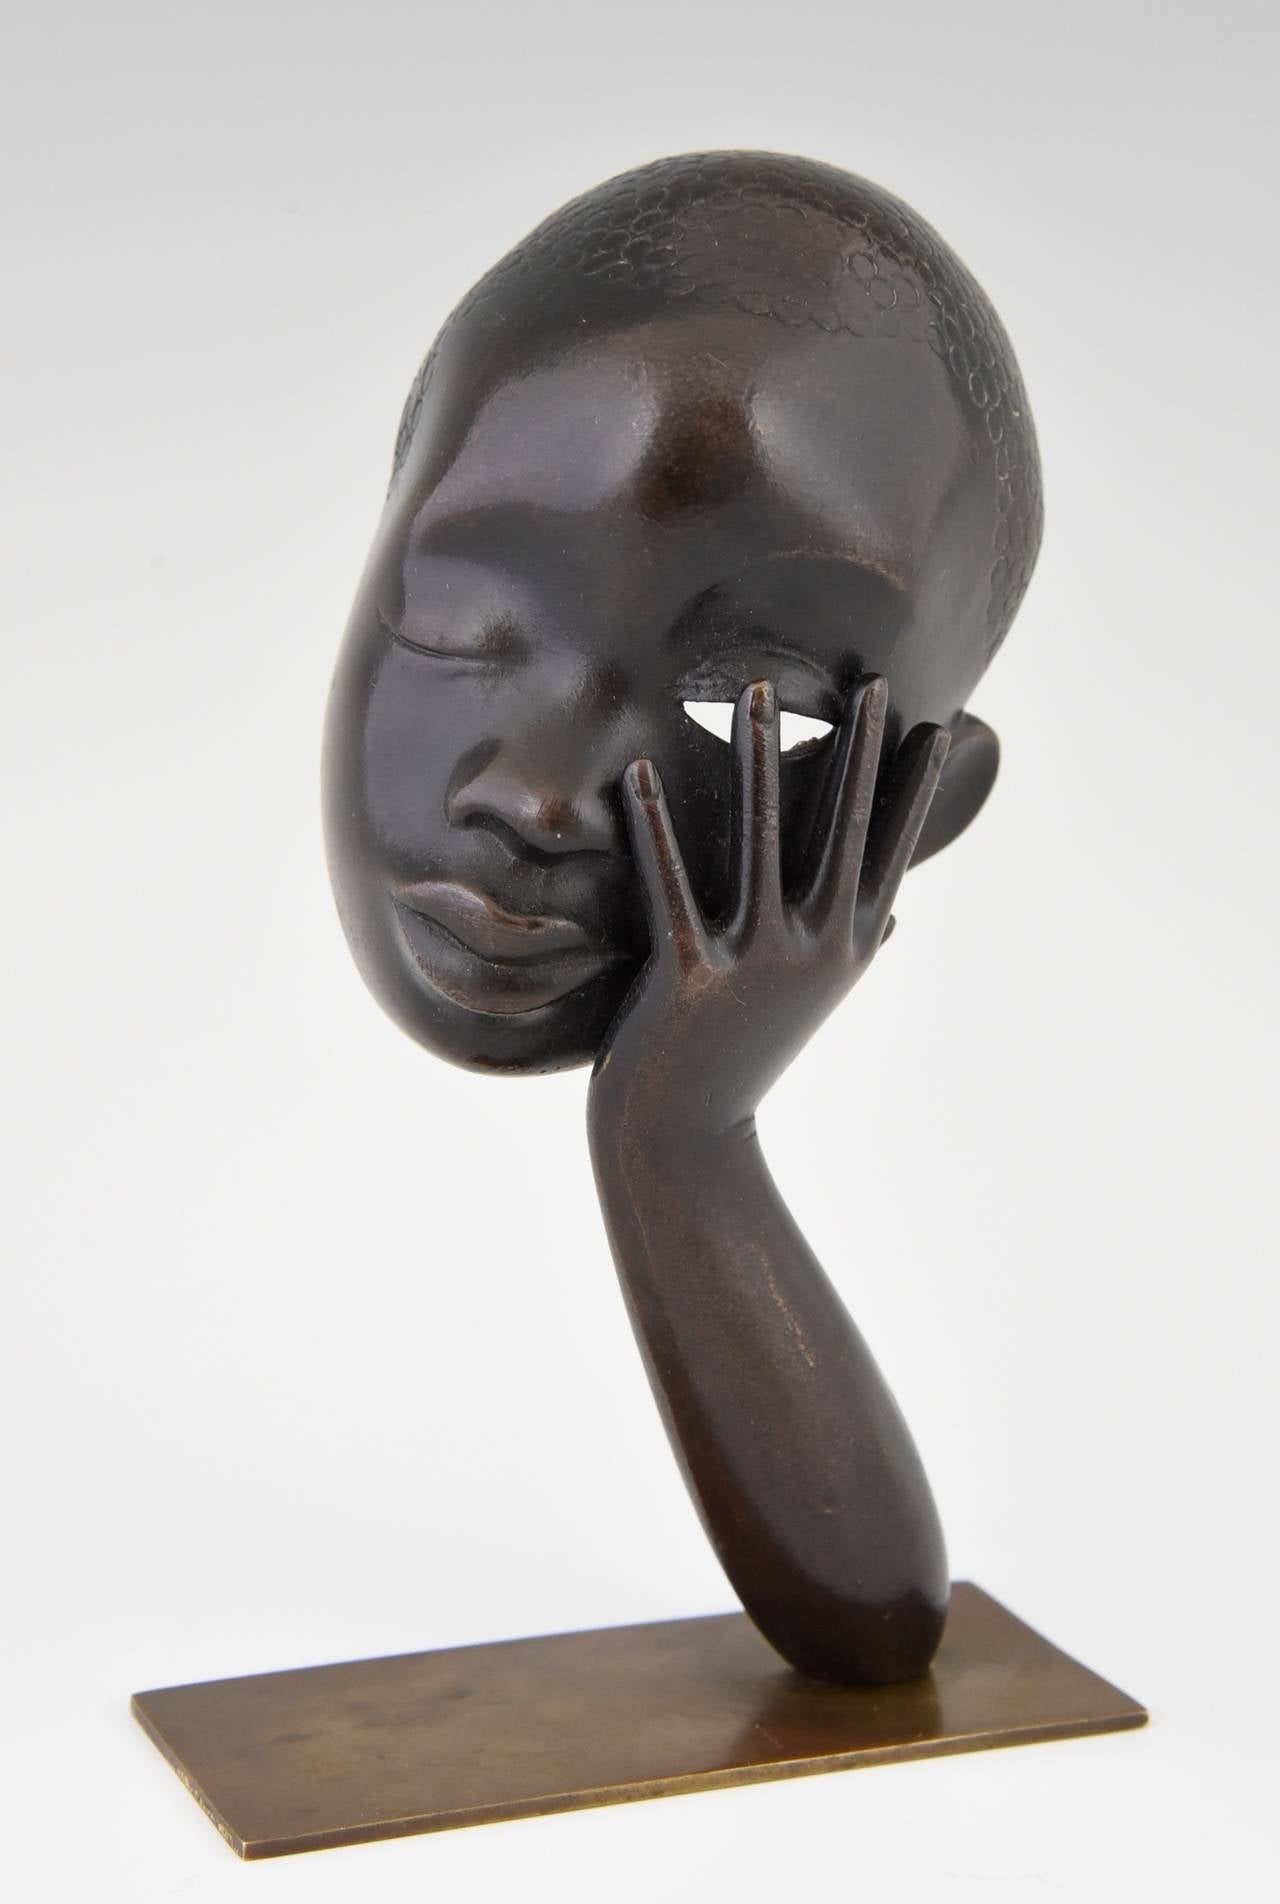 Bronze head of an African woman. 
By Hagenauer. 
Signature and marks:  
WHW, Made in Vienna Austria.  Rena. This bronze was sold at Rena Rosenthal’s shop in New York. 

Style: Art Deco.   
Date:  1930-1940.
Material:  Bronze. 
Origin: